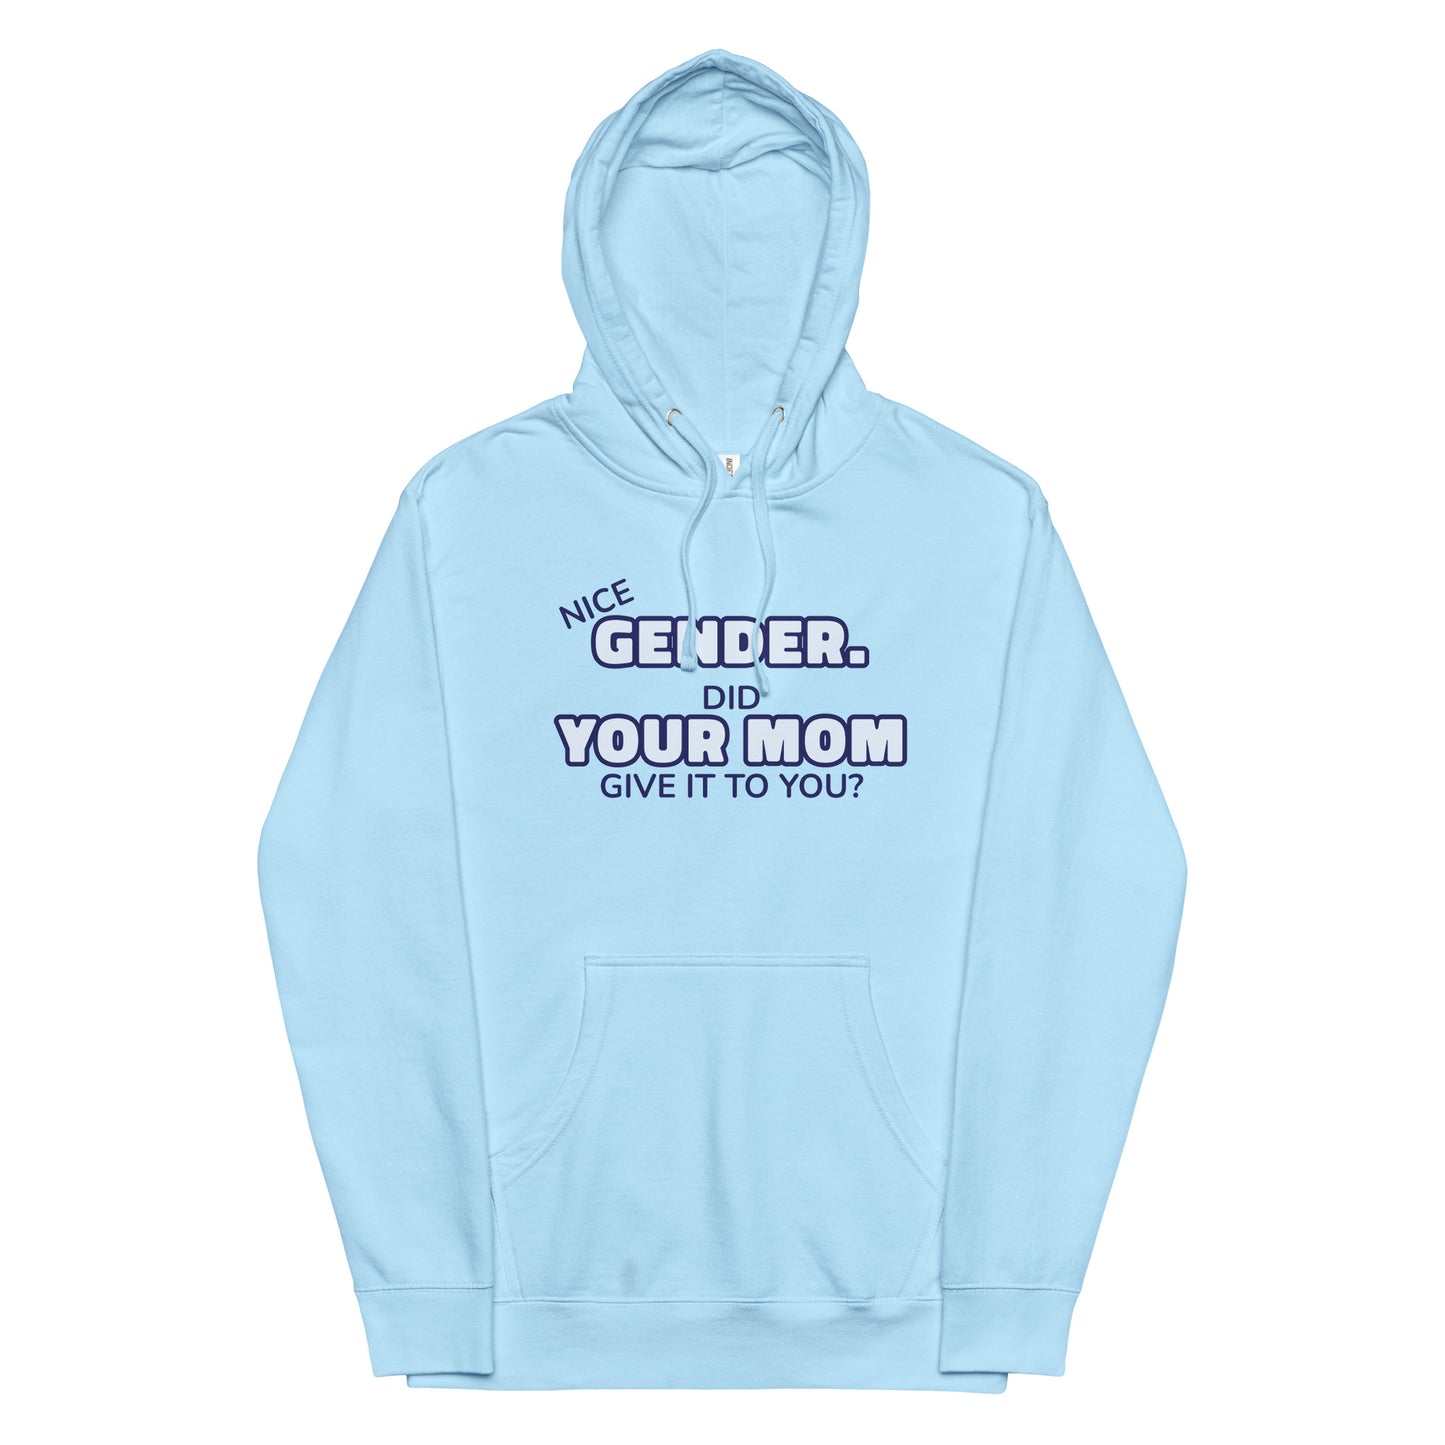 Nice Gender Did Your Mom Give it to You Unisex hoodie